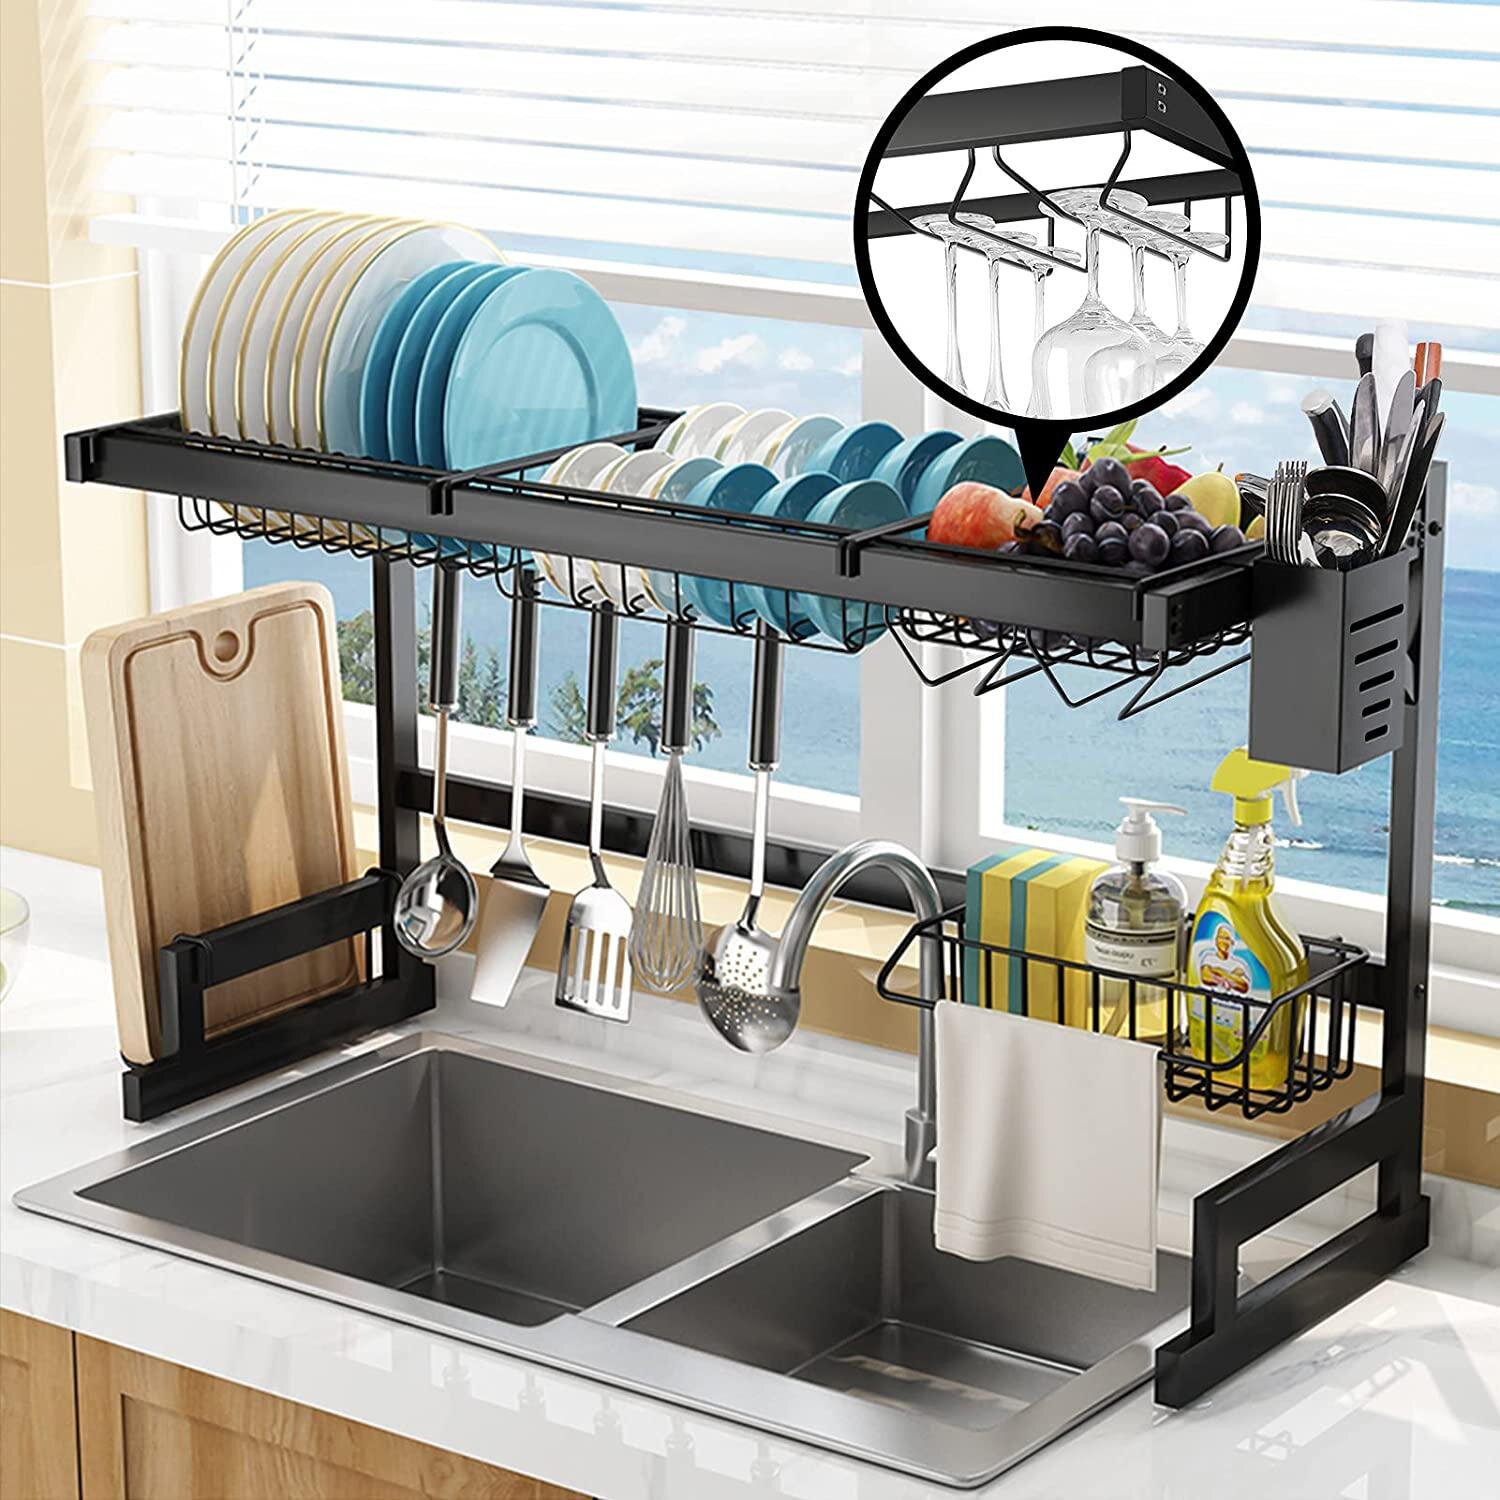 Stainless Steel Rustproof 2 Tier Dish Rack with Adjustable Pot Lid organizer Black Dish Drying Rack with Pot Holder Silverware Tray Glass Holder for Kitchen Counter